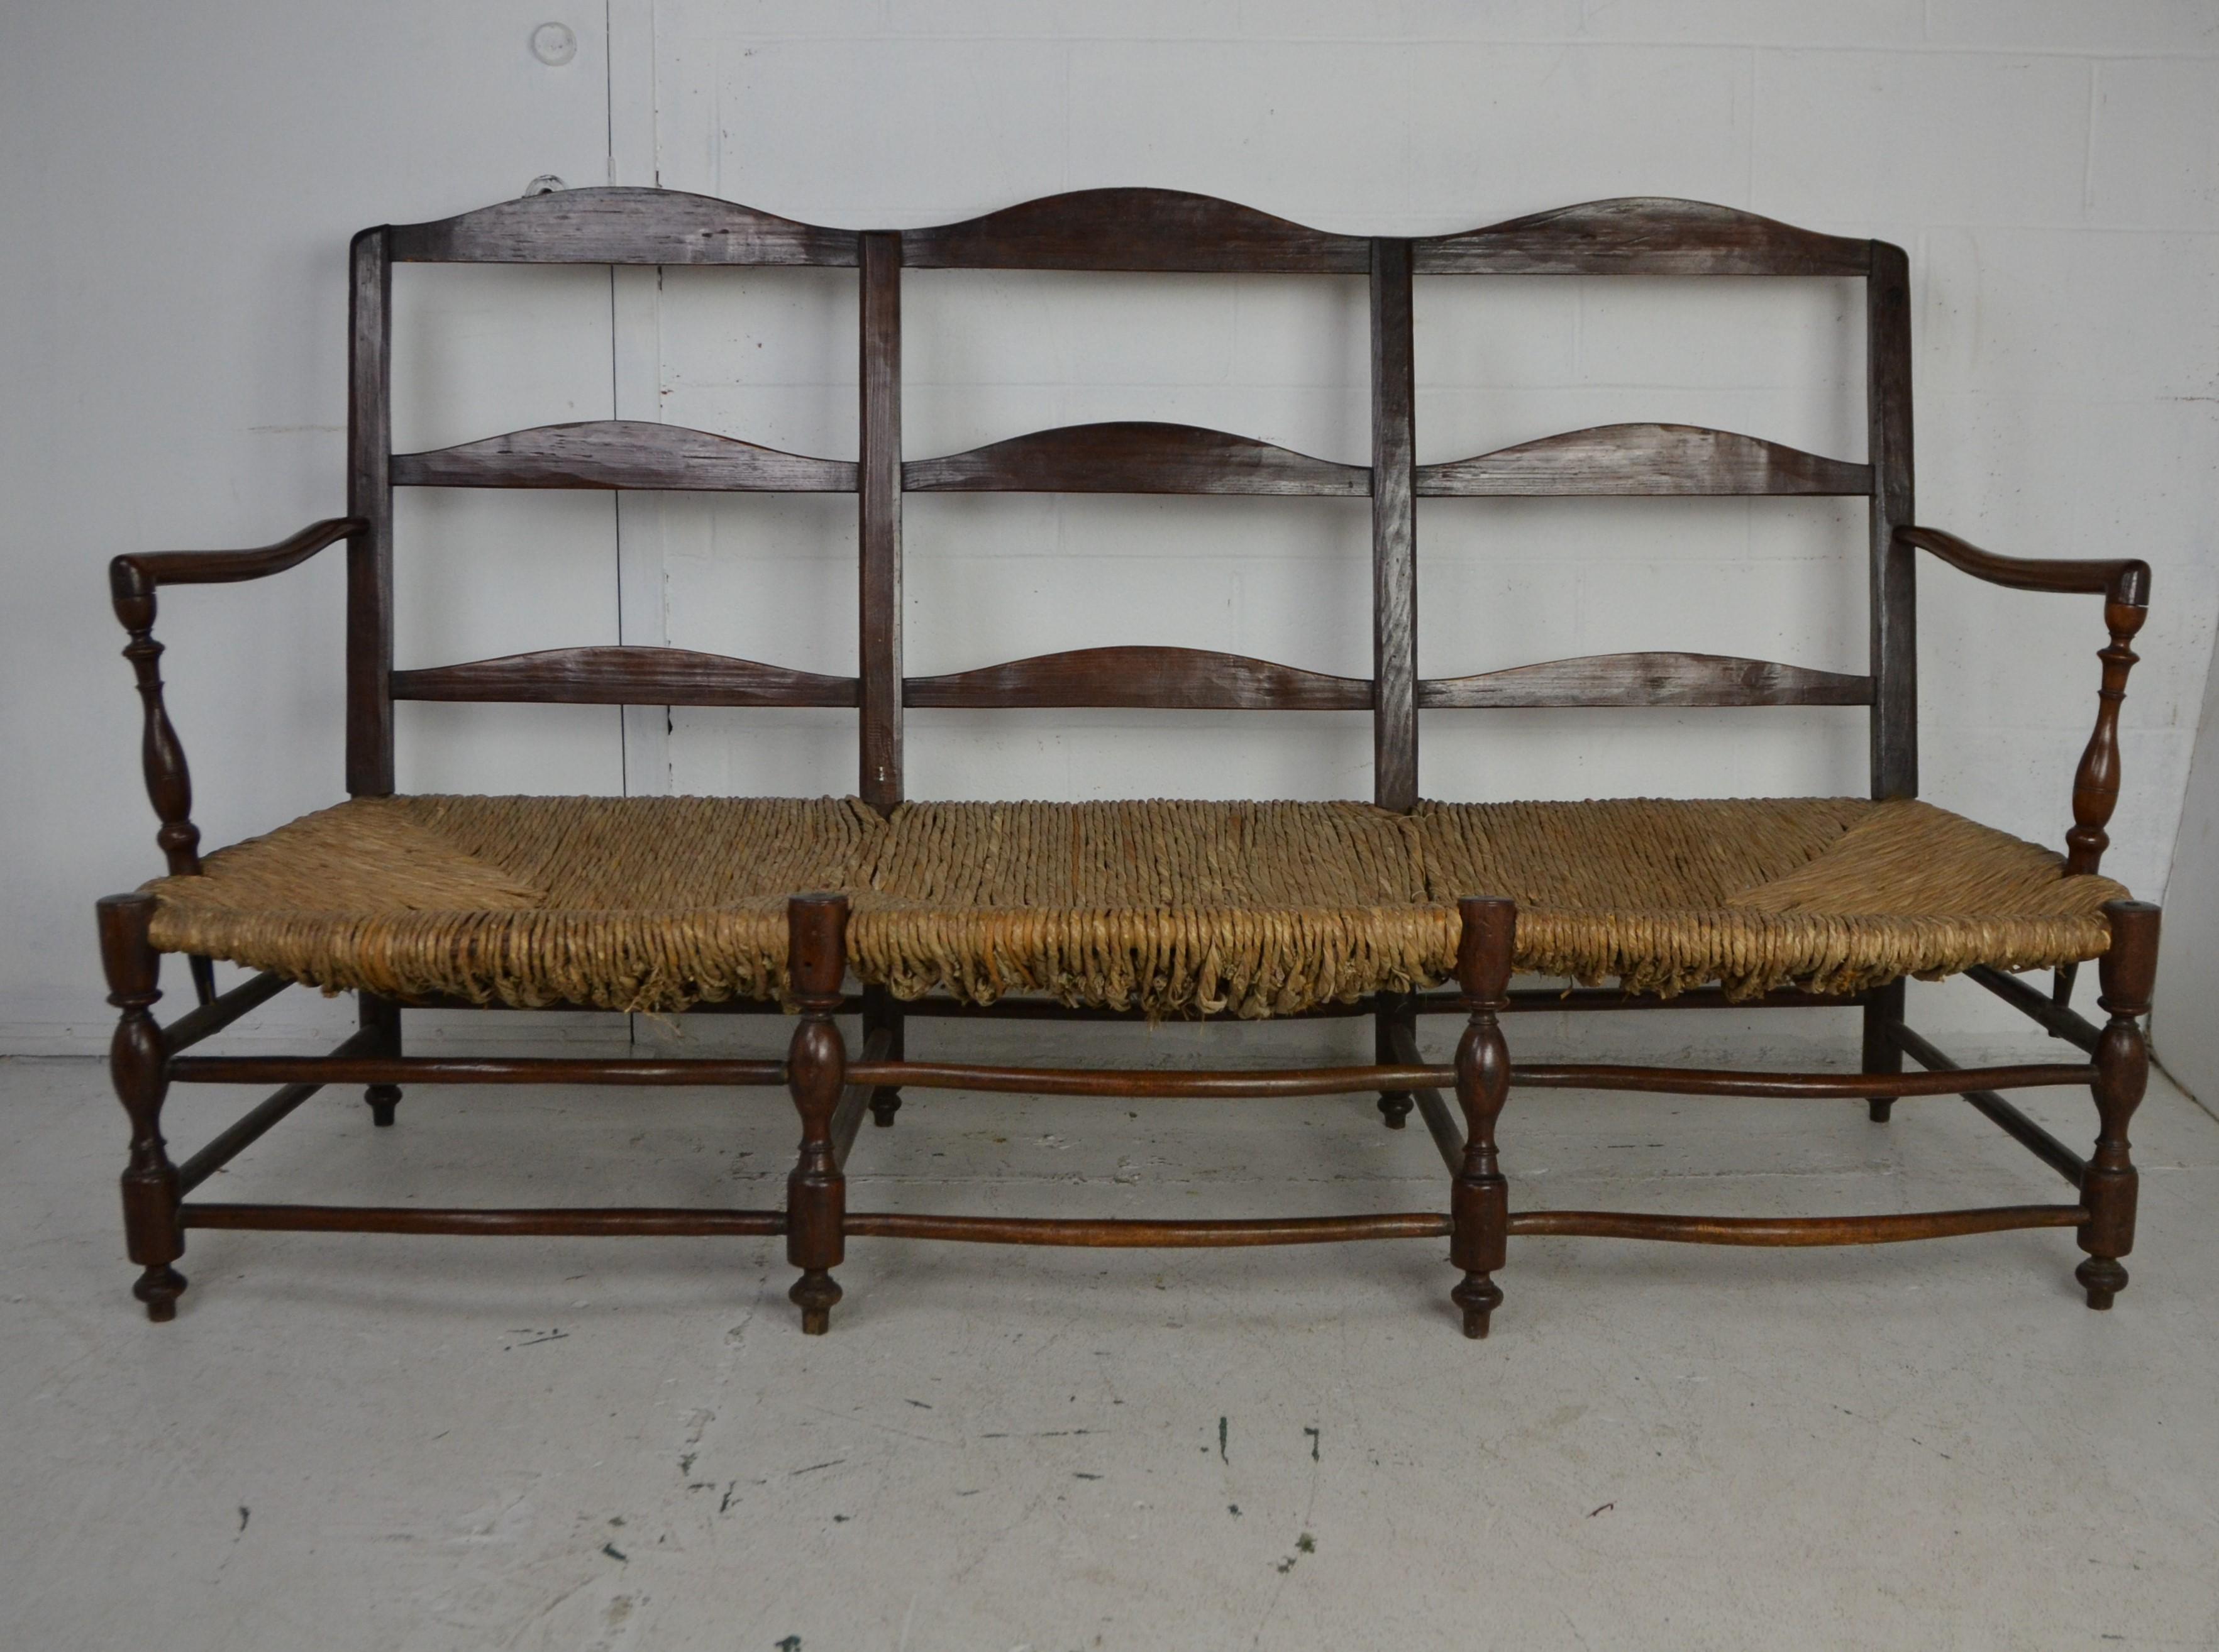 19th century French a 3 seat Ladderback Settee with rush seat and newly upholstered seat cushion. Walnut frame with turned legs and crinoline stretchers.